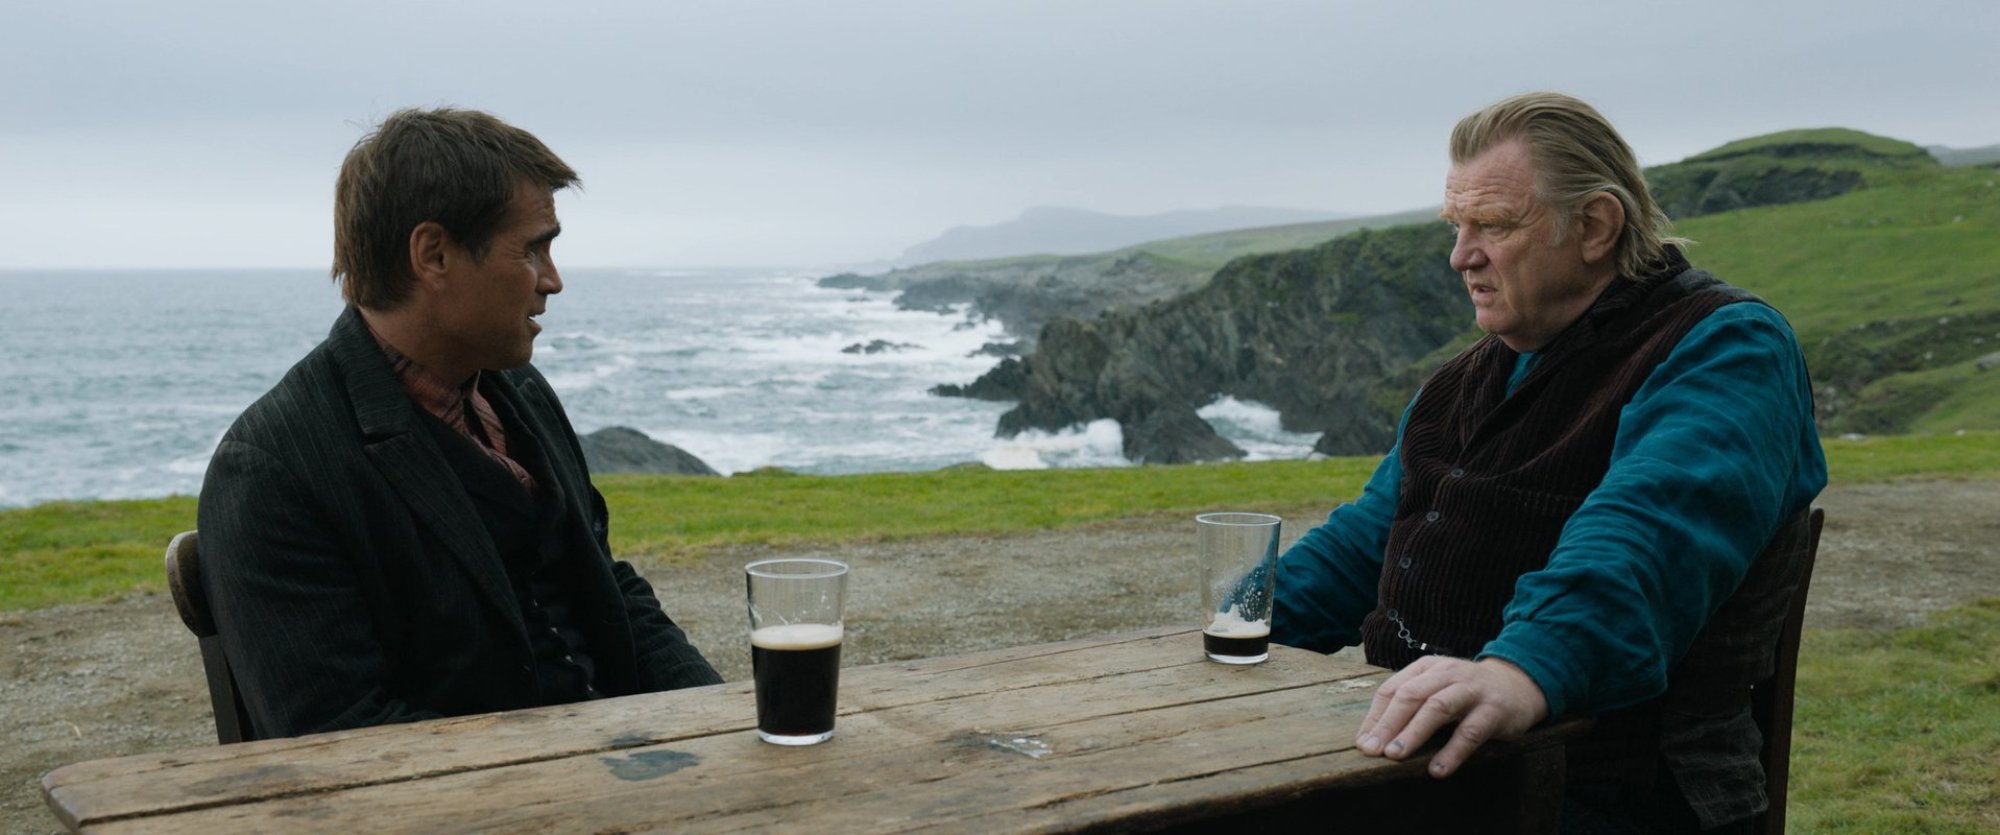 'The Banshees of Inisherin' Colin Farrell as Pádraic Súilleabháin and Brendan Gleeson as Colm Doherty sitting across from each other drinking beer in front of a view of the ocean